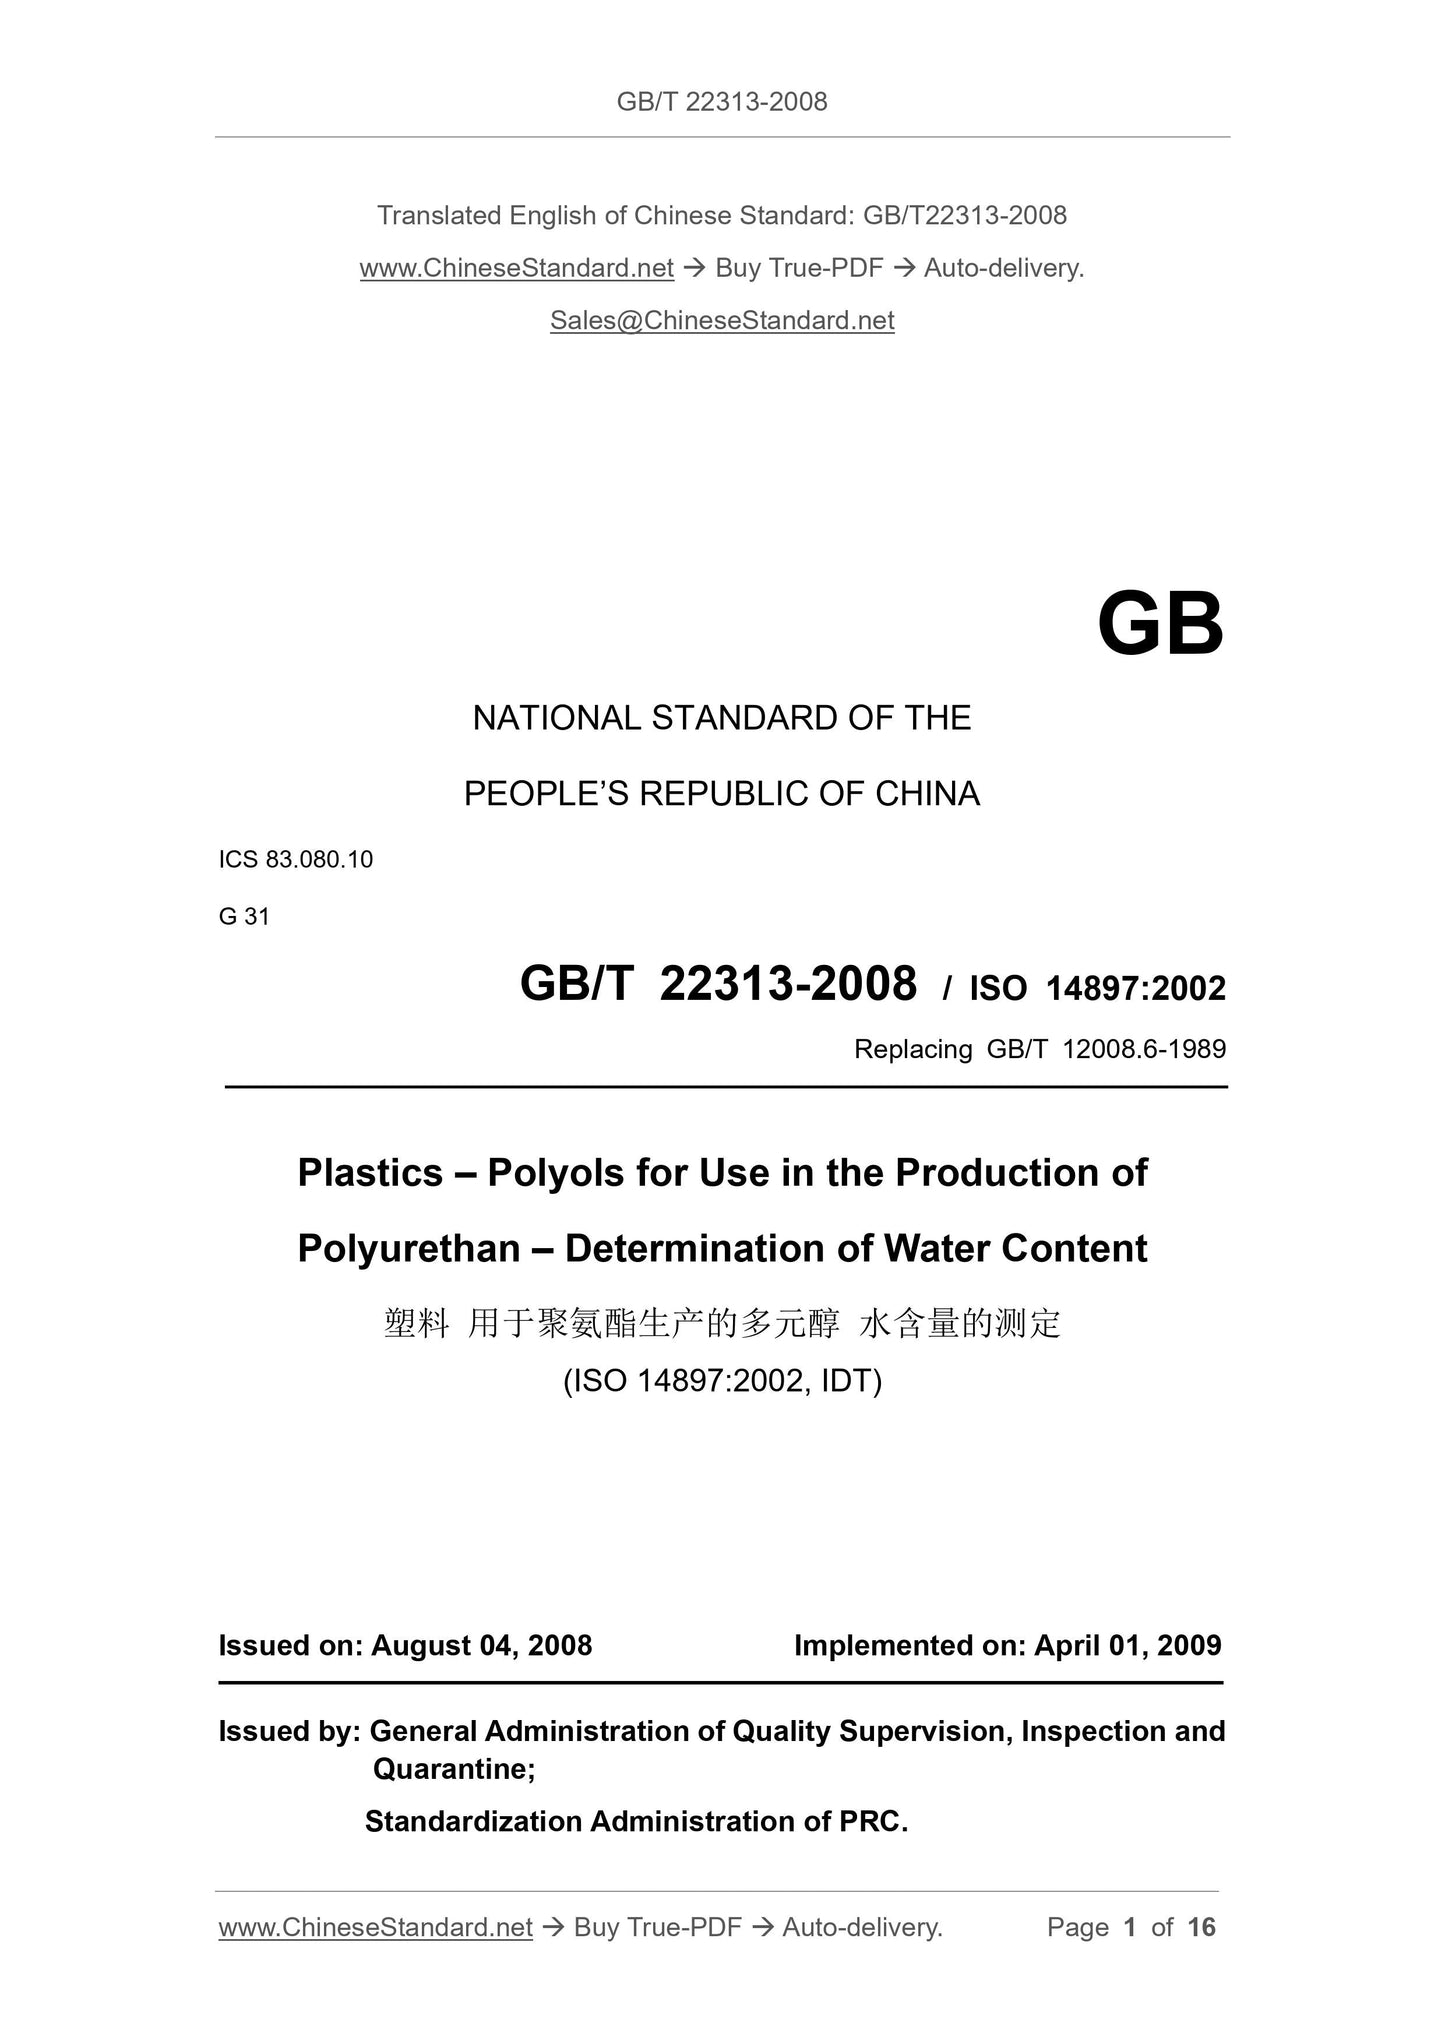 GB/T 22313-2008 Page 1